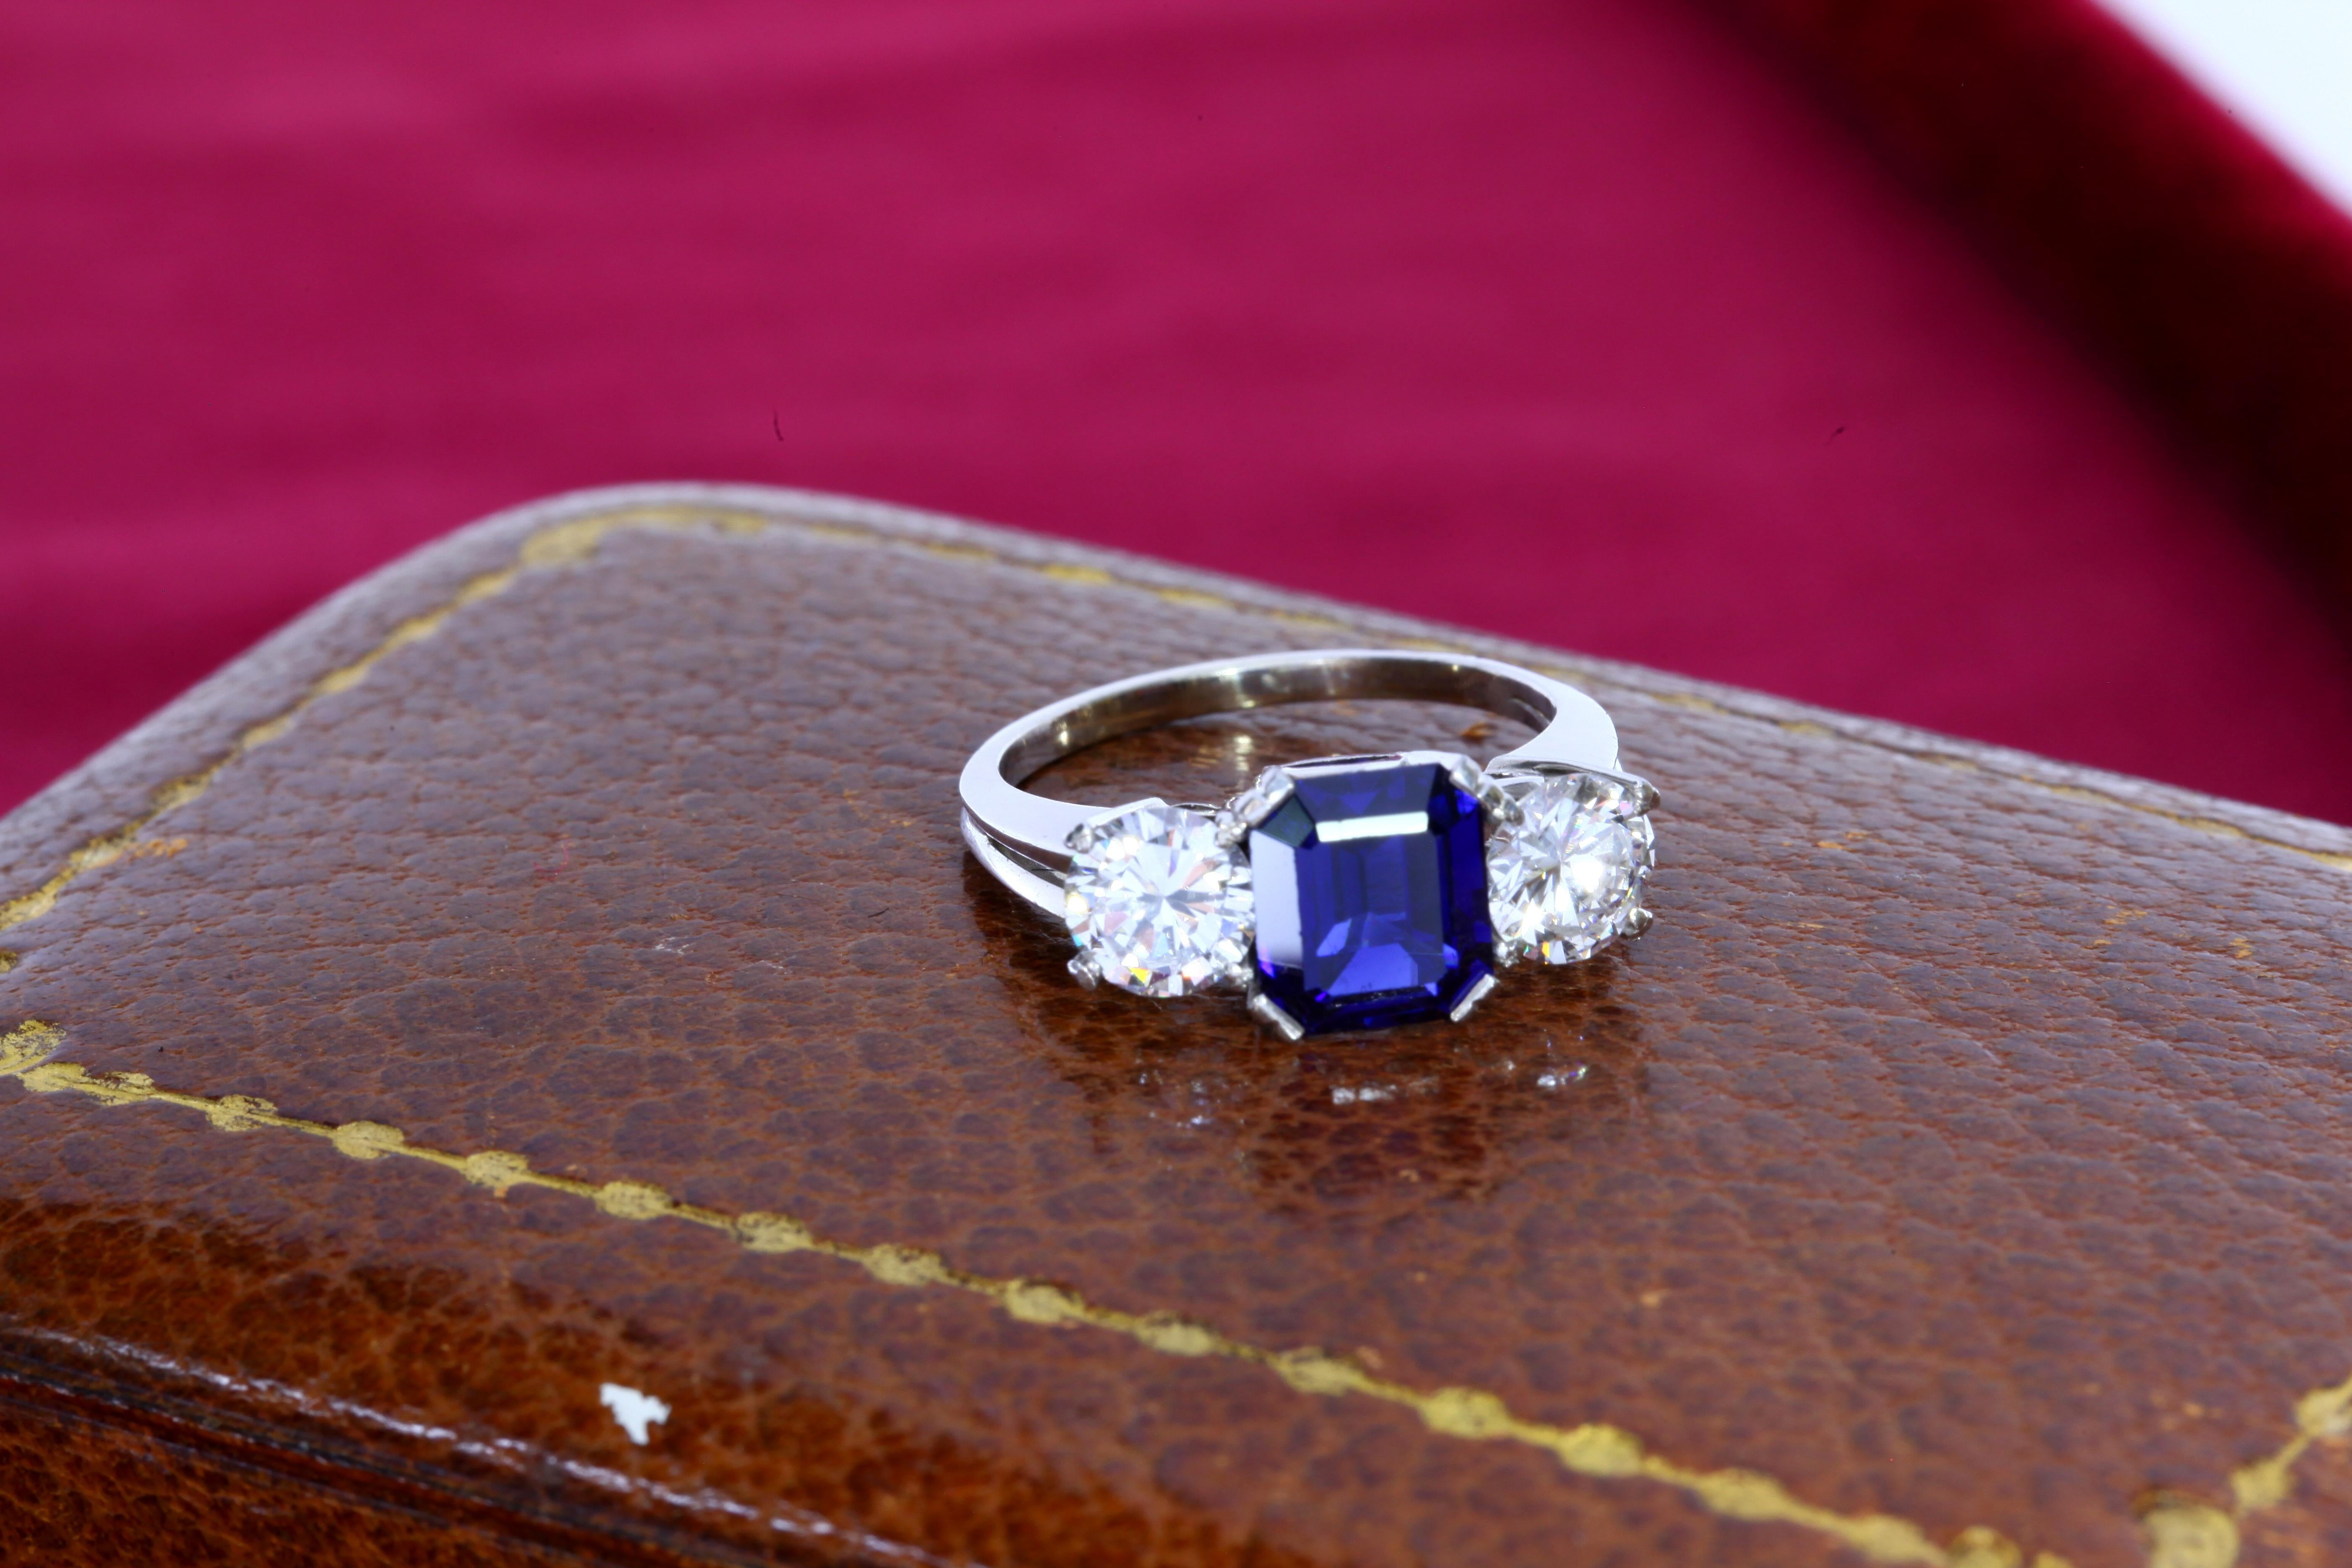 The squarish 2.22 carat octagonal step cut sapphire is flanked by two large white diamonds weighing approximately 1 carat each. The sapphire is well saturated with a deep blue color. 